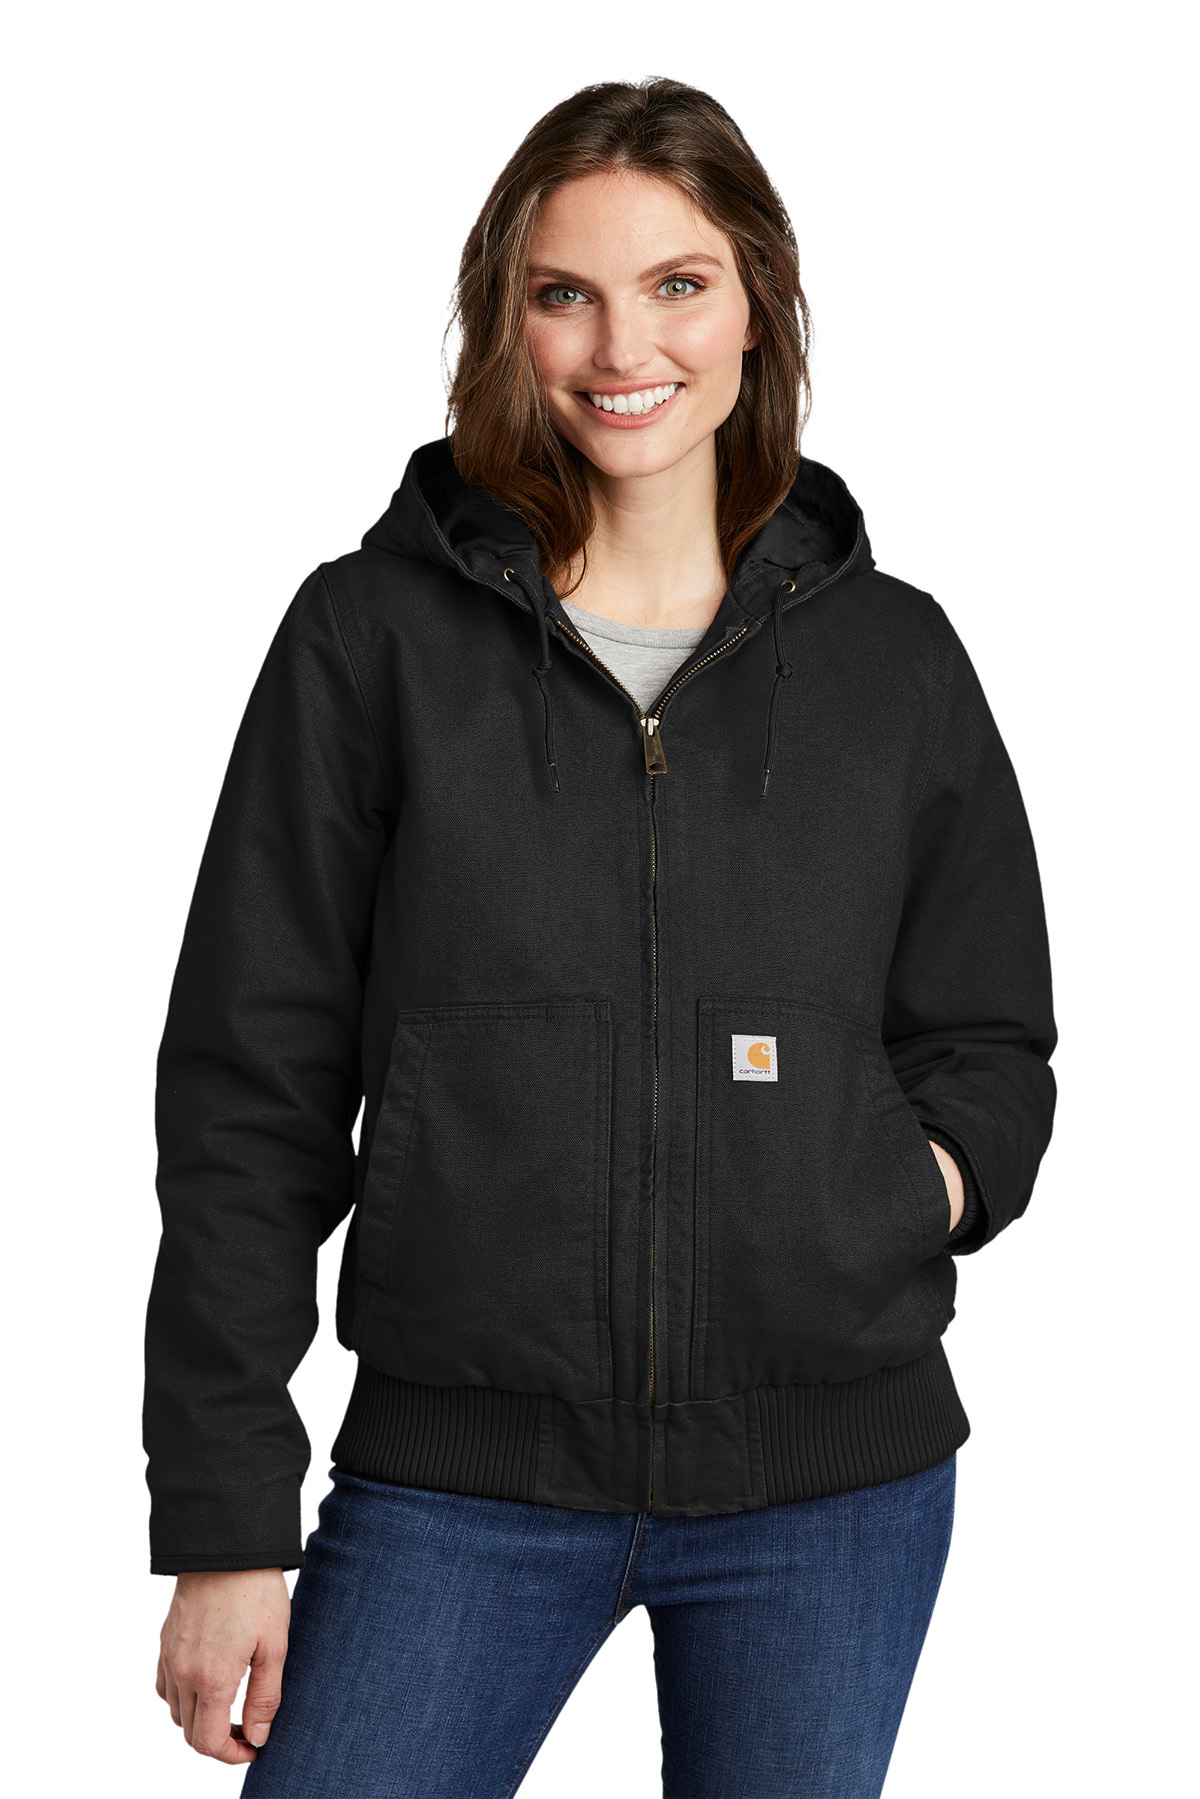 Carhartt Women’s Washed Duck Active Jac | Product | SanMar